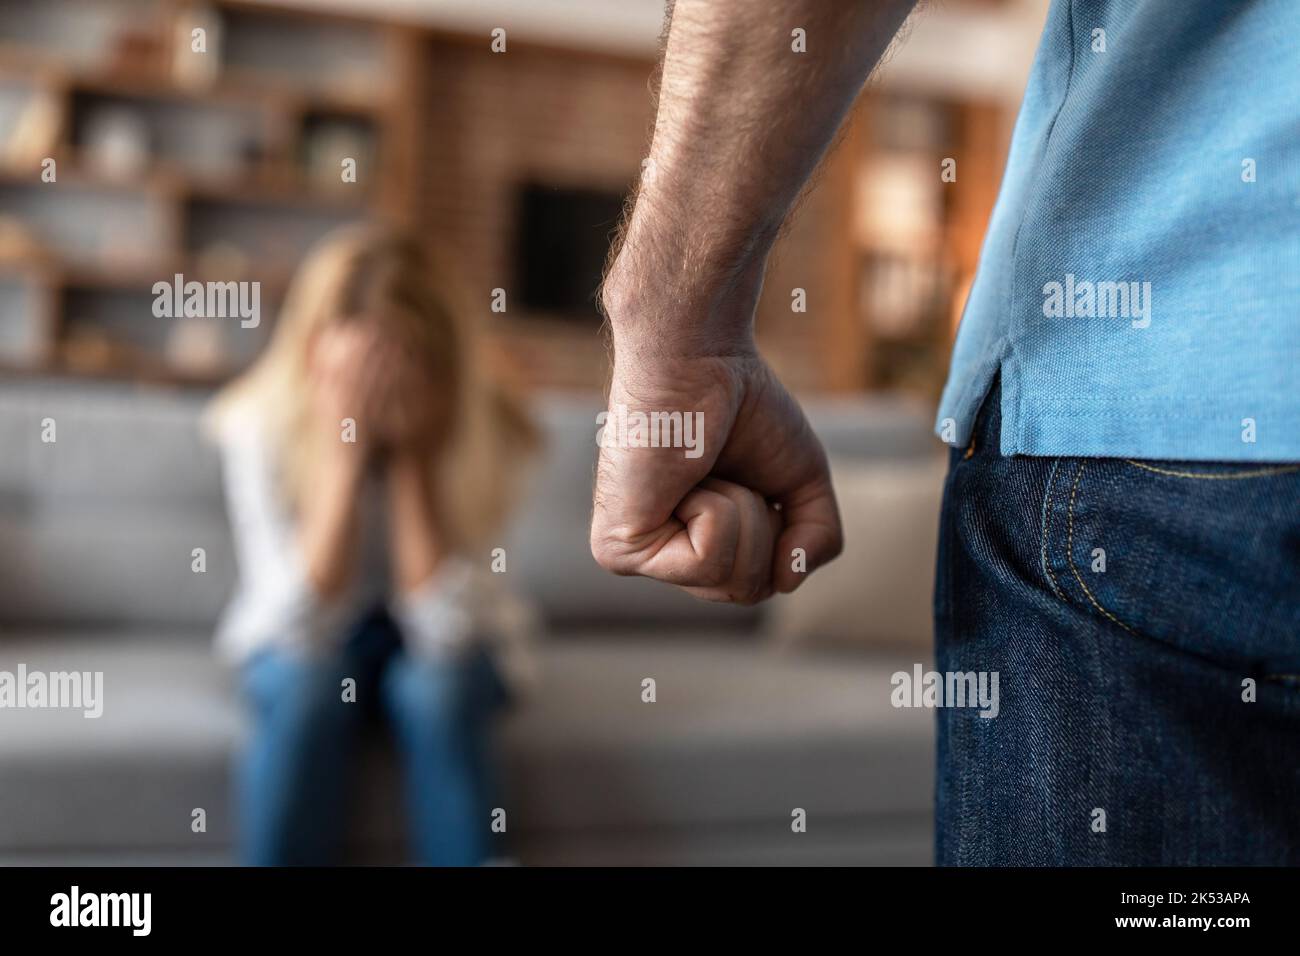 Frightened crying mature caucasian wife afraid of her husband, man threatening with fist Stock Photo